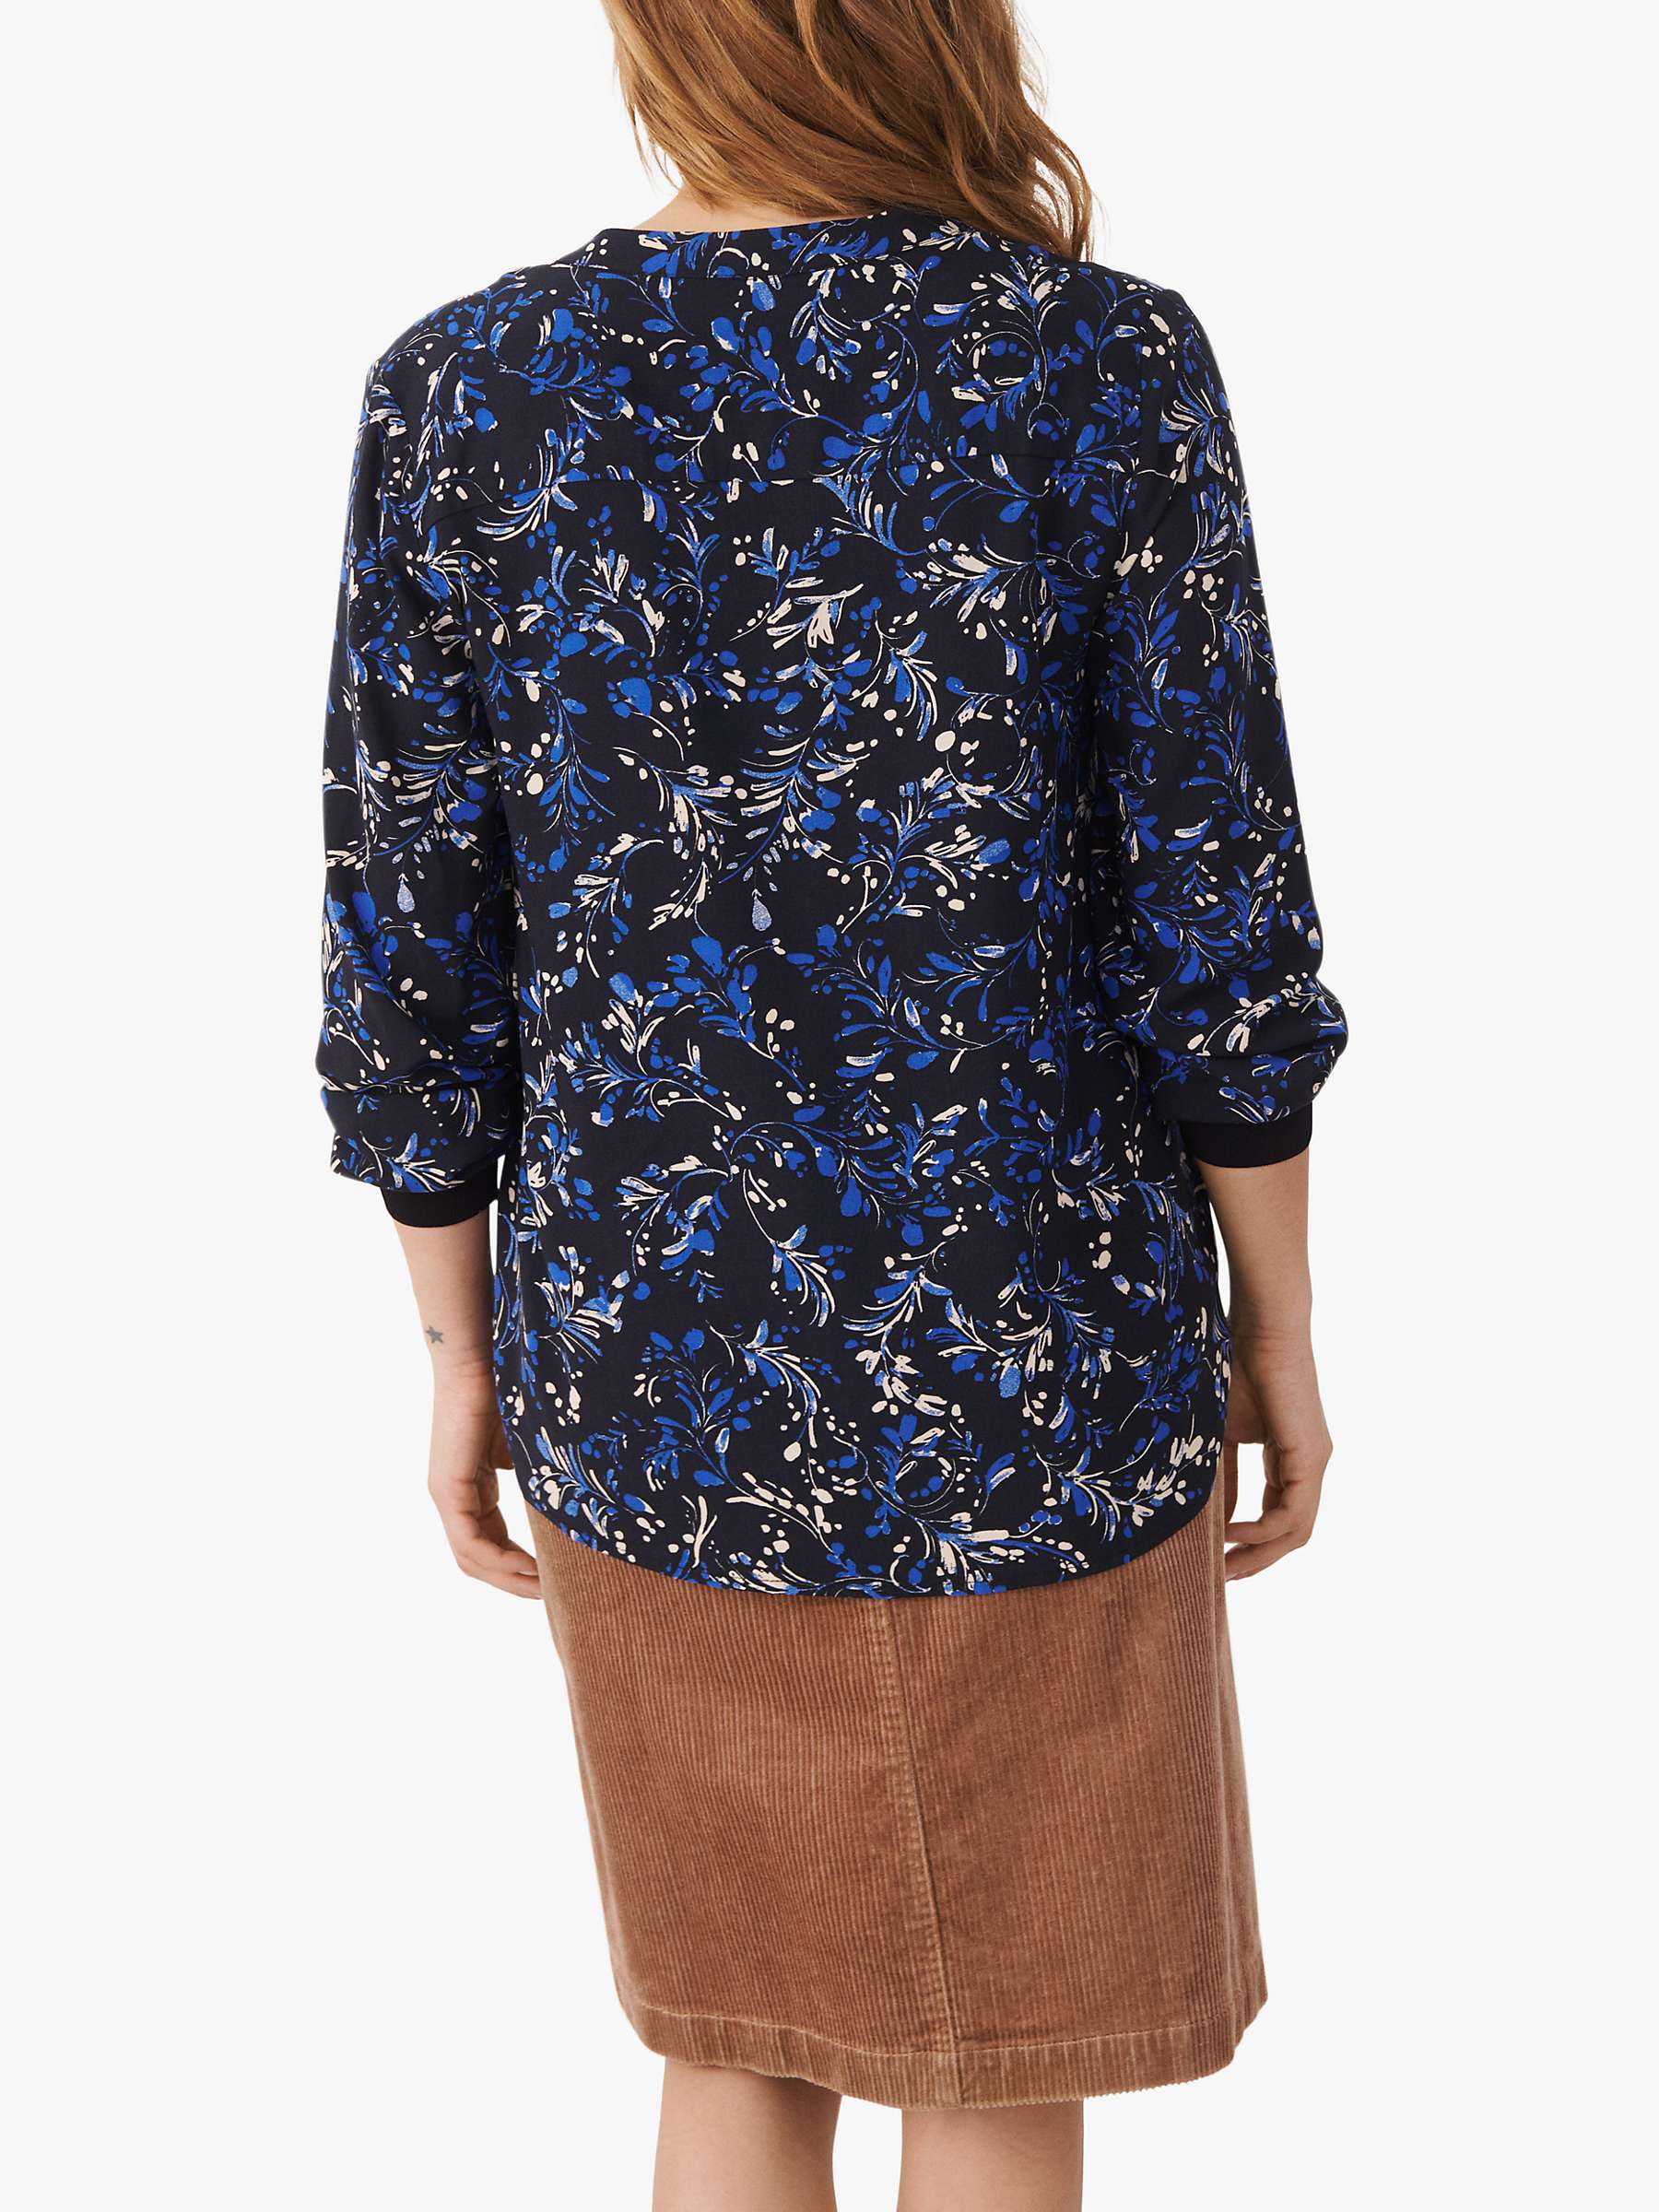 Buy Part Two Tonnie Long Sleeve Print Blouse, Dark Navy Marble Online at johnlewis.com